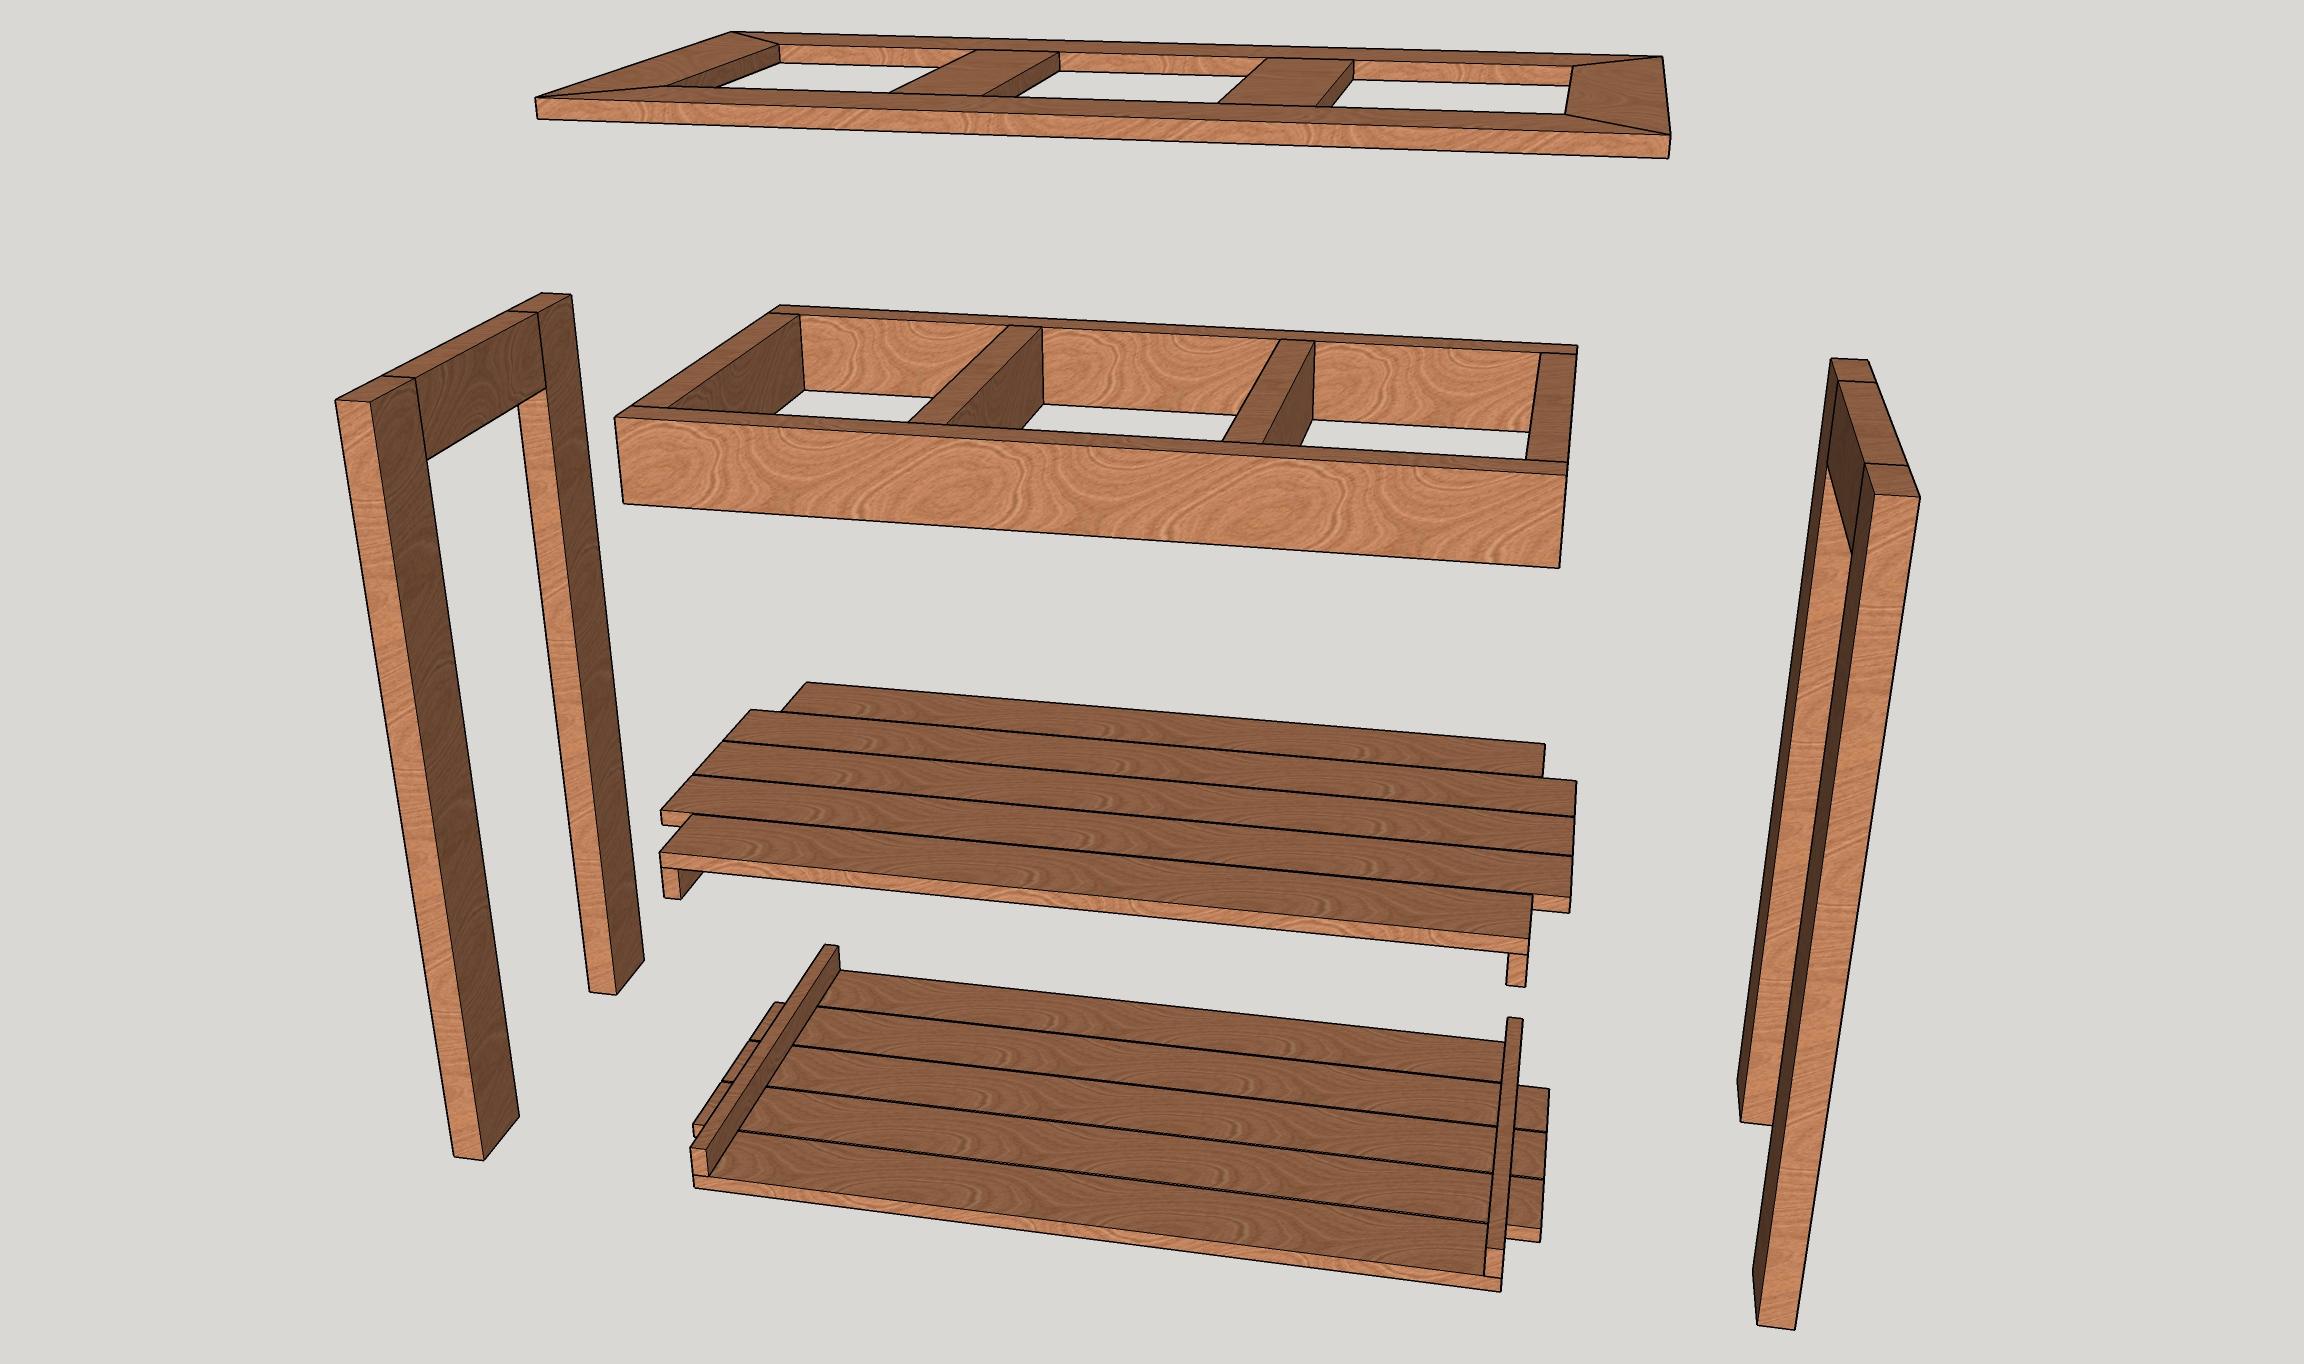 Second draft of aquarium stand with shelves, exploded, designed in SketchUp